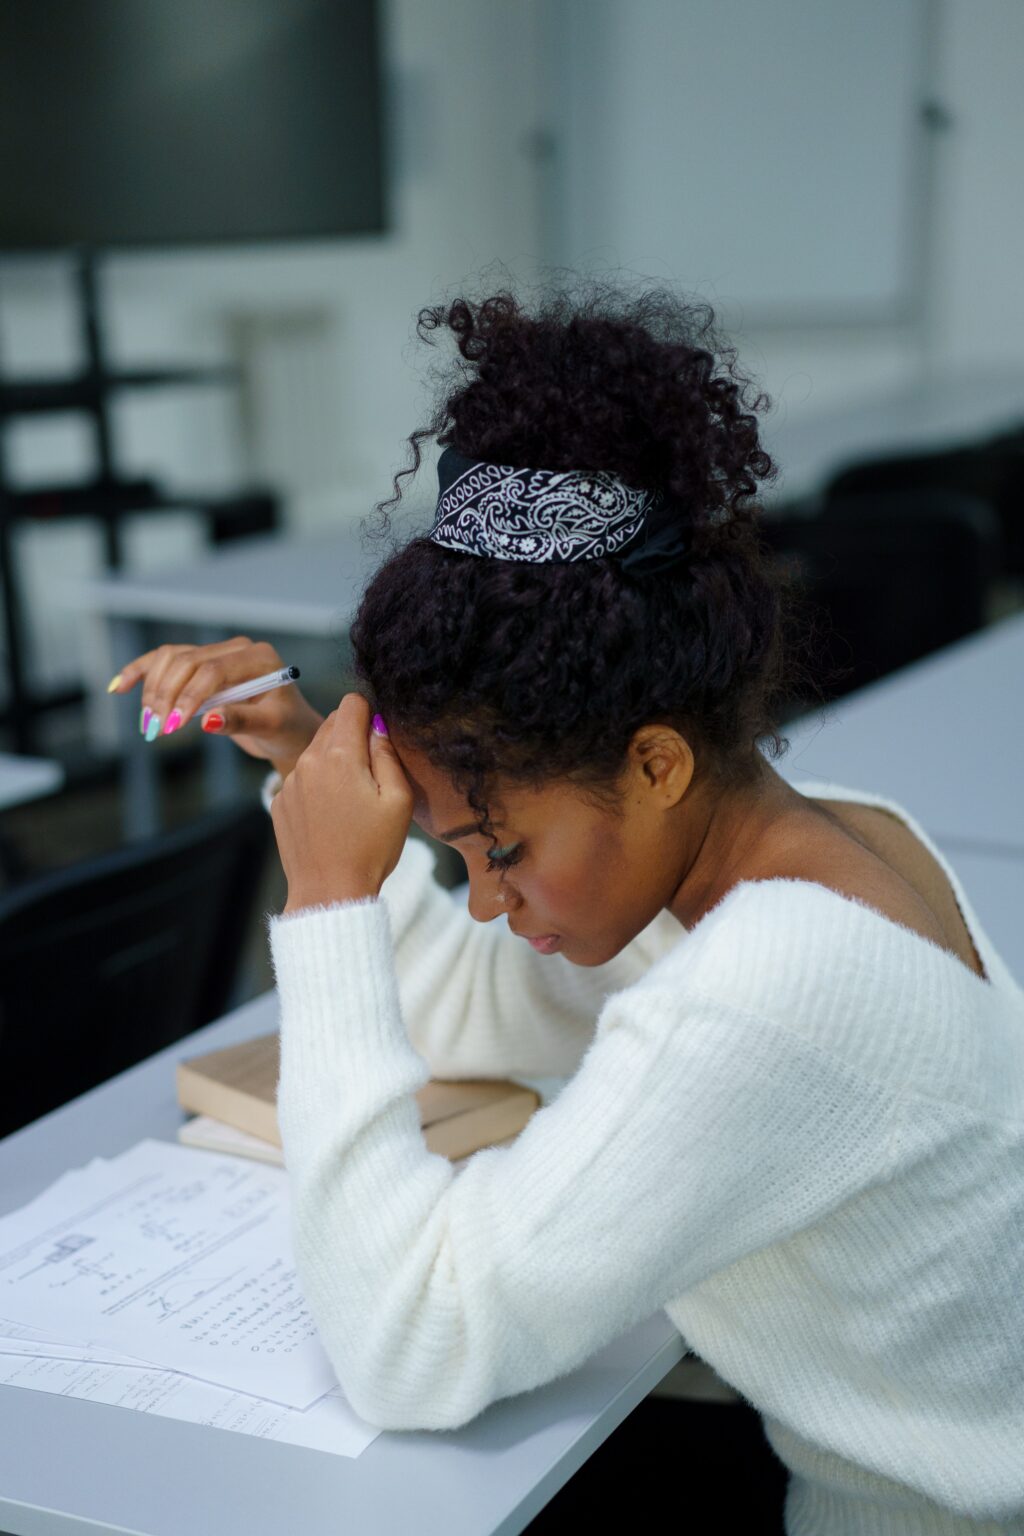 A student sits at a desk. She looks down at a few papers on the desk, which are filled with writing. She has one hand up to her forehead, and the other holds a pencil.